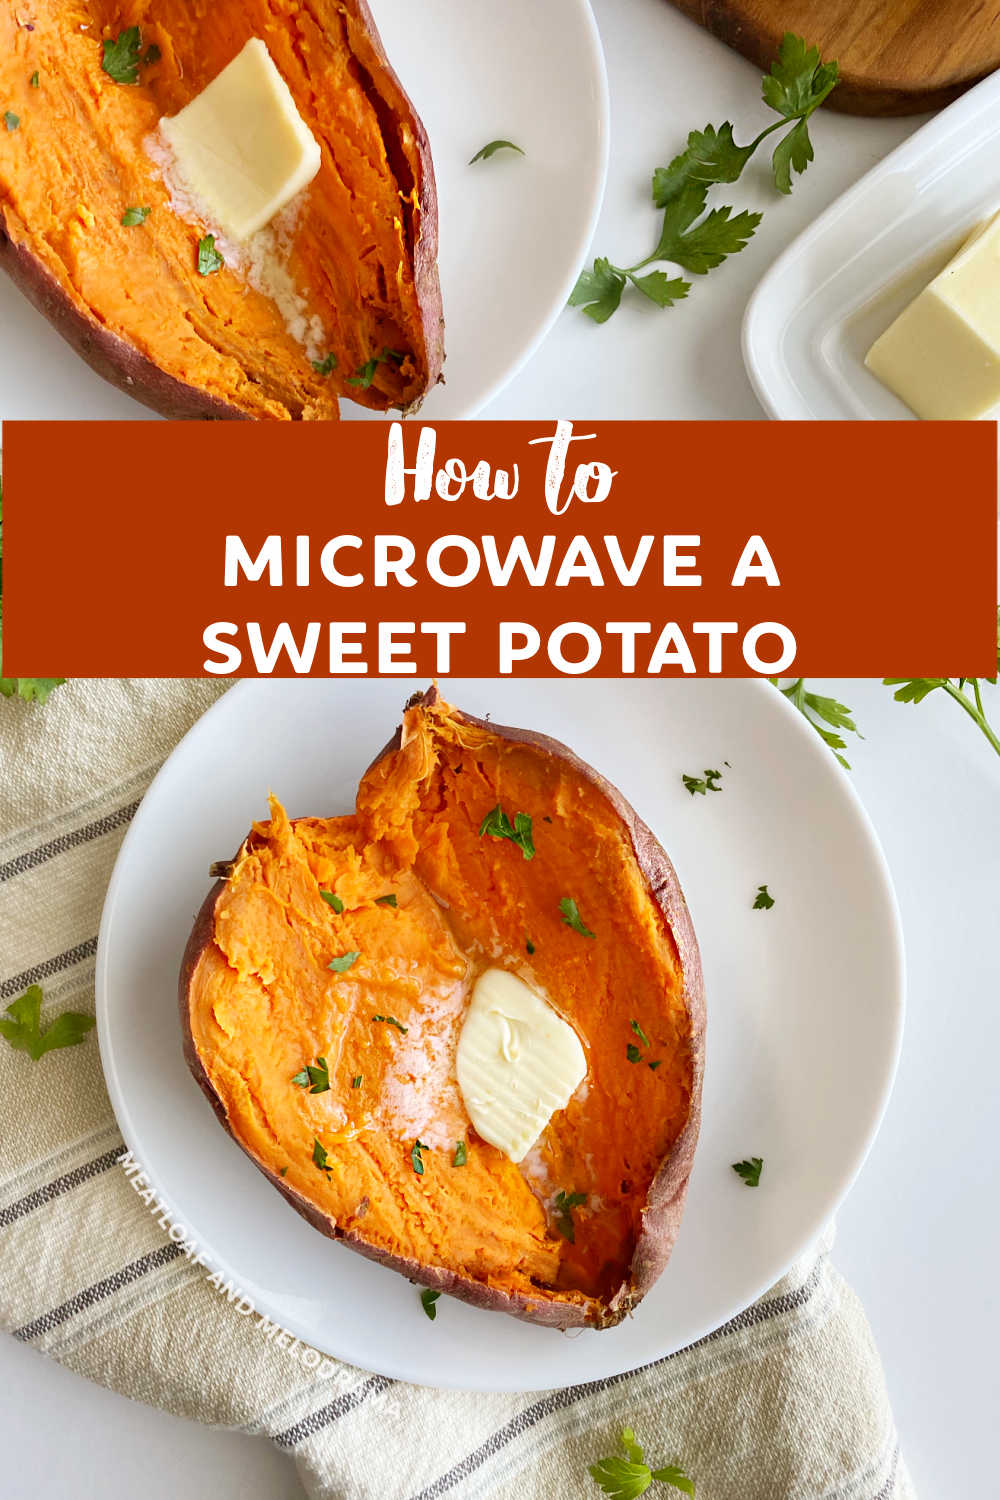 Learn how to microwave a sweet potato that is perfectly cooked in minutes with this easy recipe. Makes a quick and healthy side dish that goes with just about any main dish or add your favorite toppings for a simple meal on it's own! via @meamel